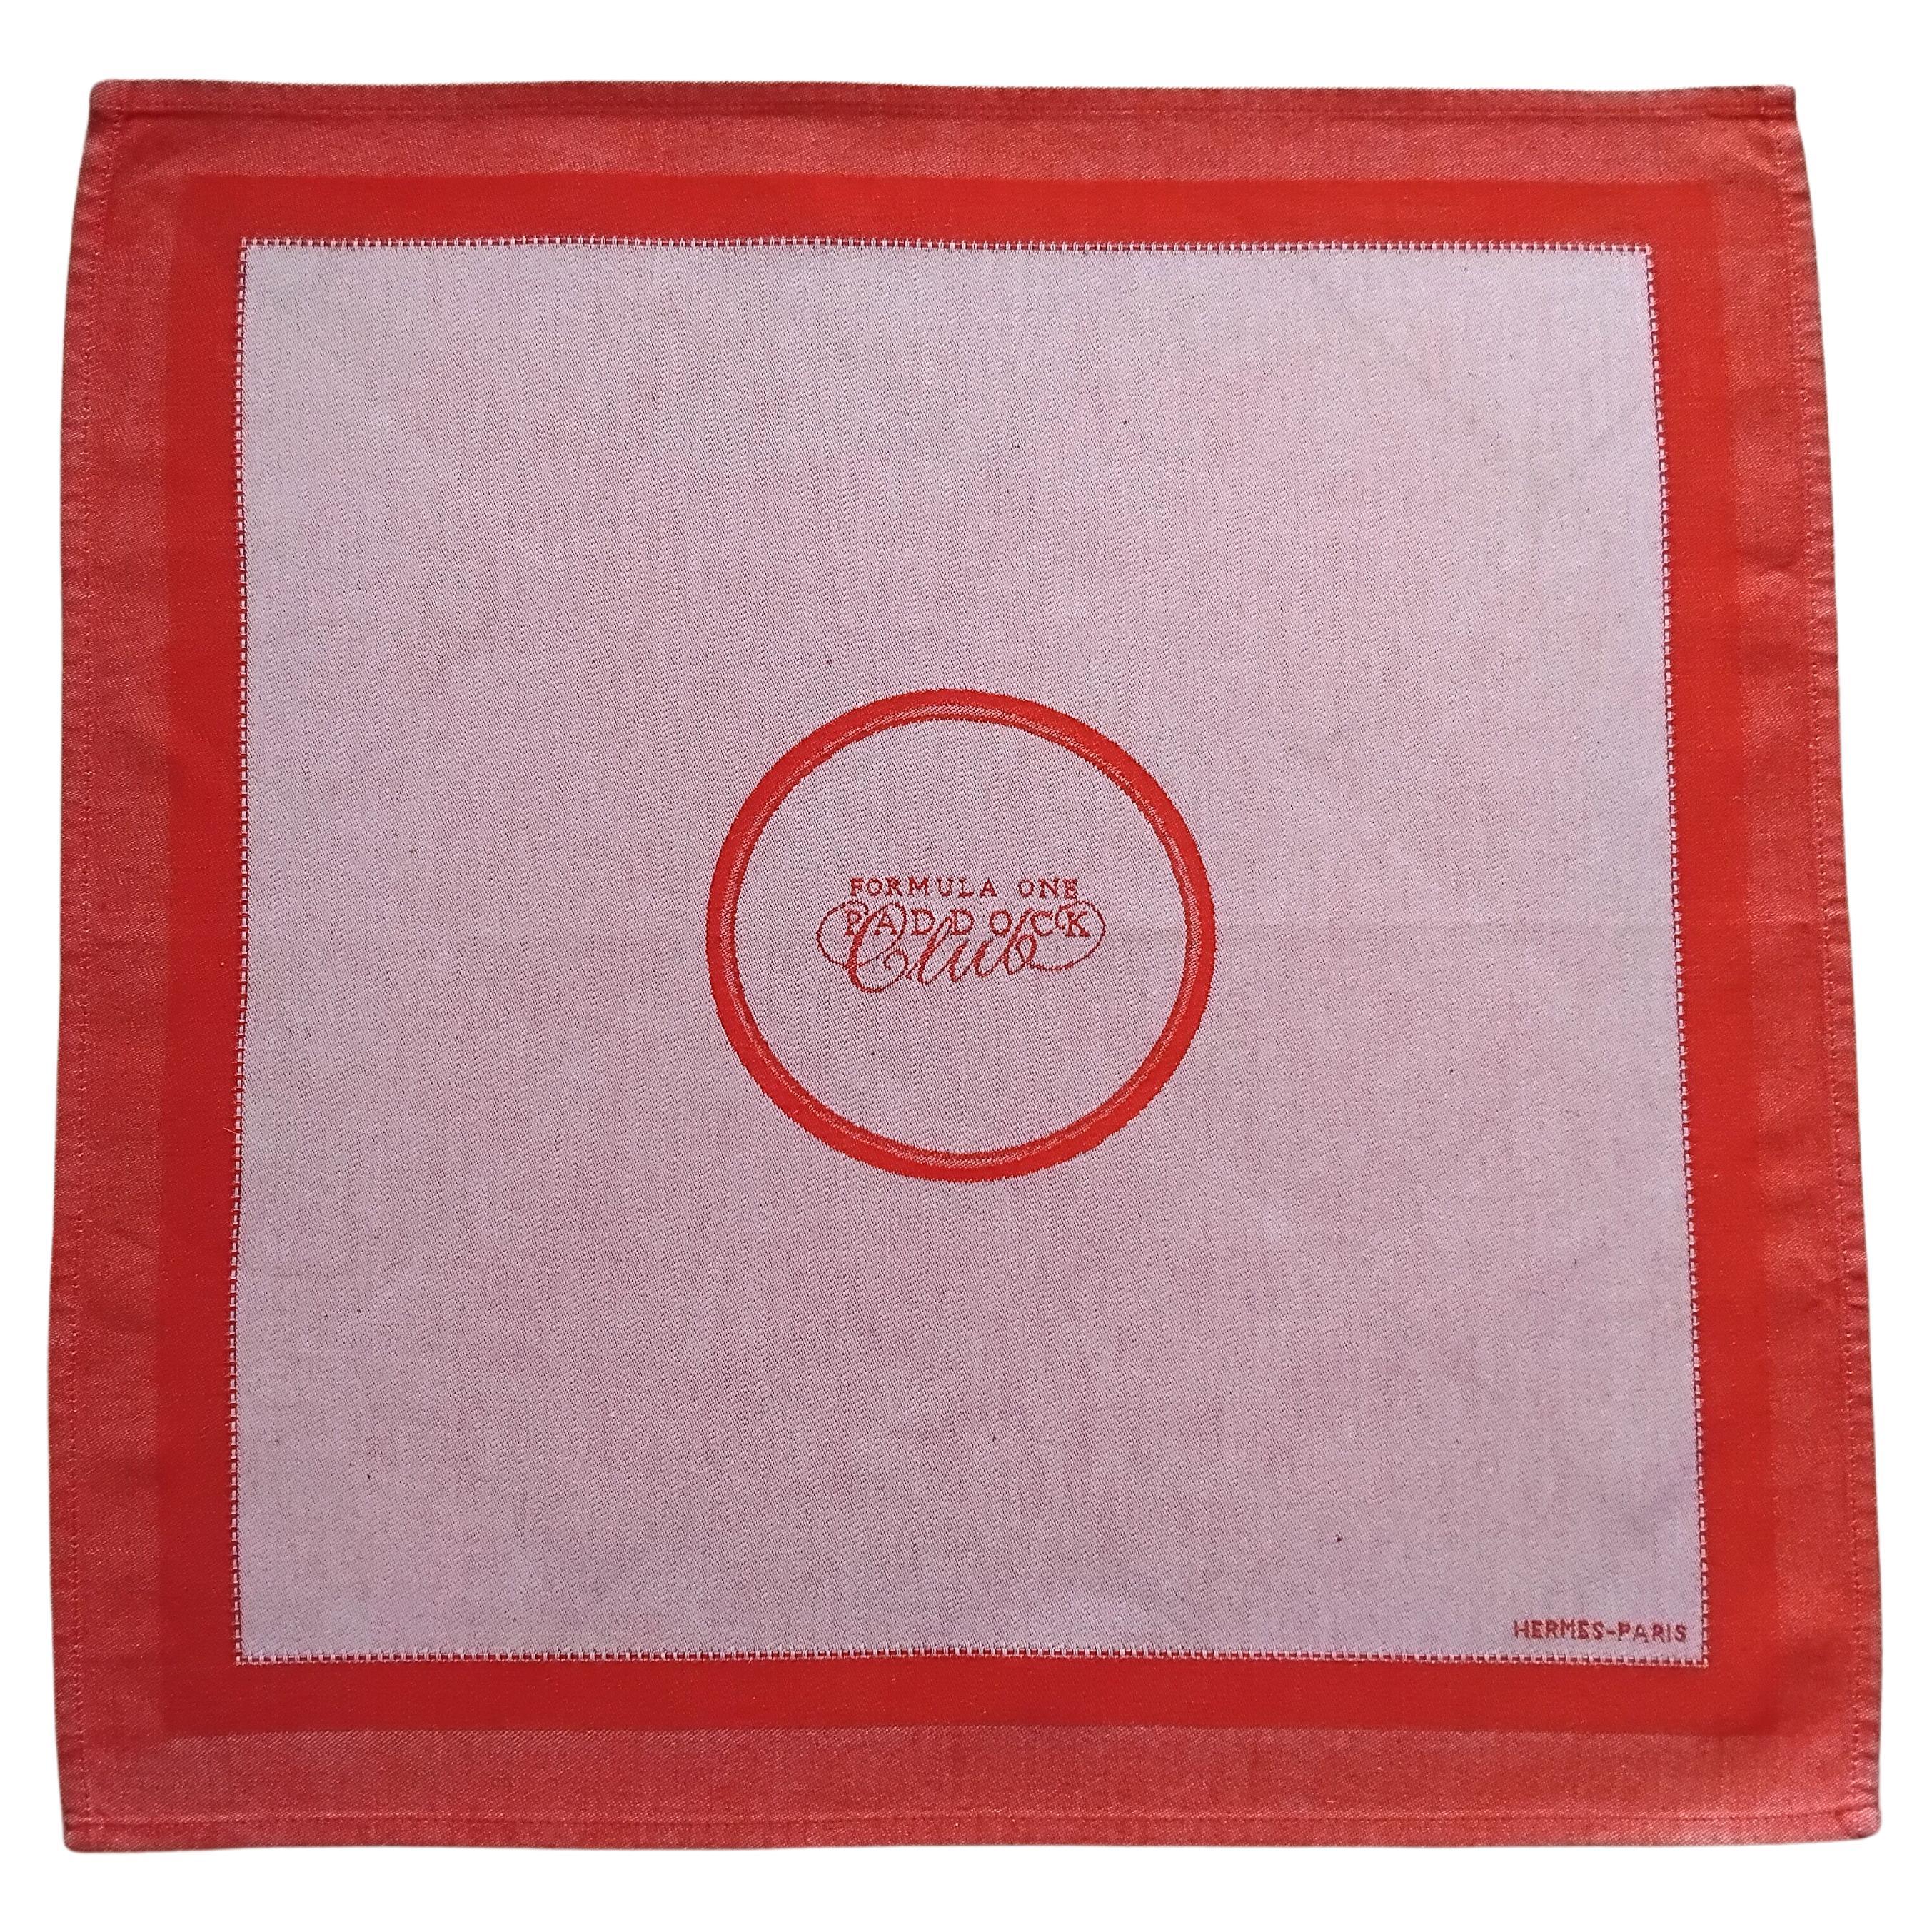 Rare Authentic Hermès Napkin

Made by Hermès for the Formula 1 Paddock Club

This is a private club that we can find at at Formula 1 Grand Prix car races

Can be used to decorate a pedestal table, a table, a desck, a bar, can be framed etc.

No care